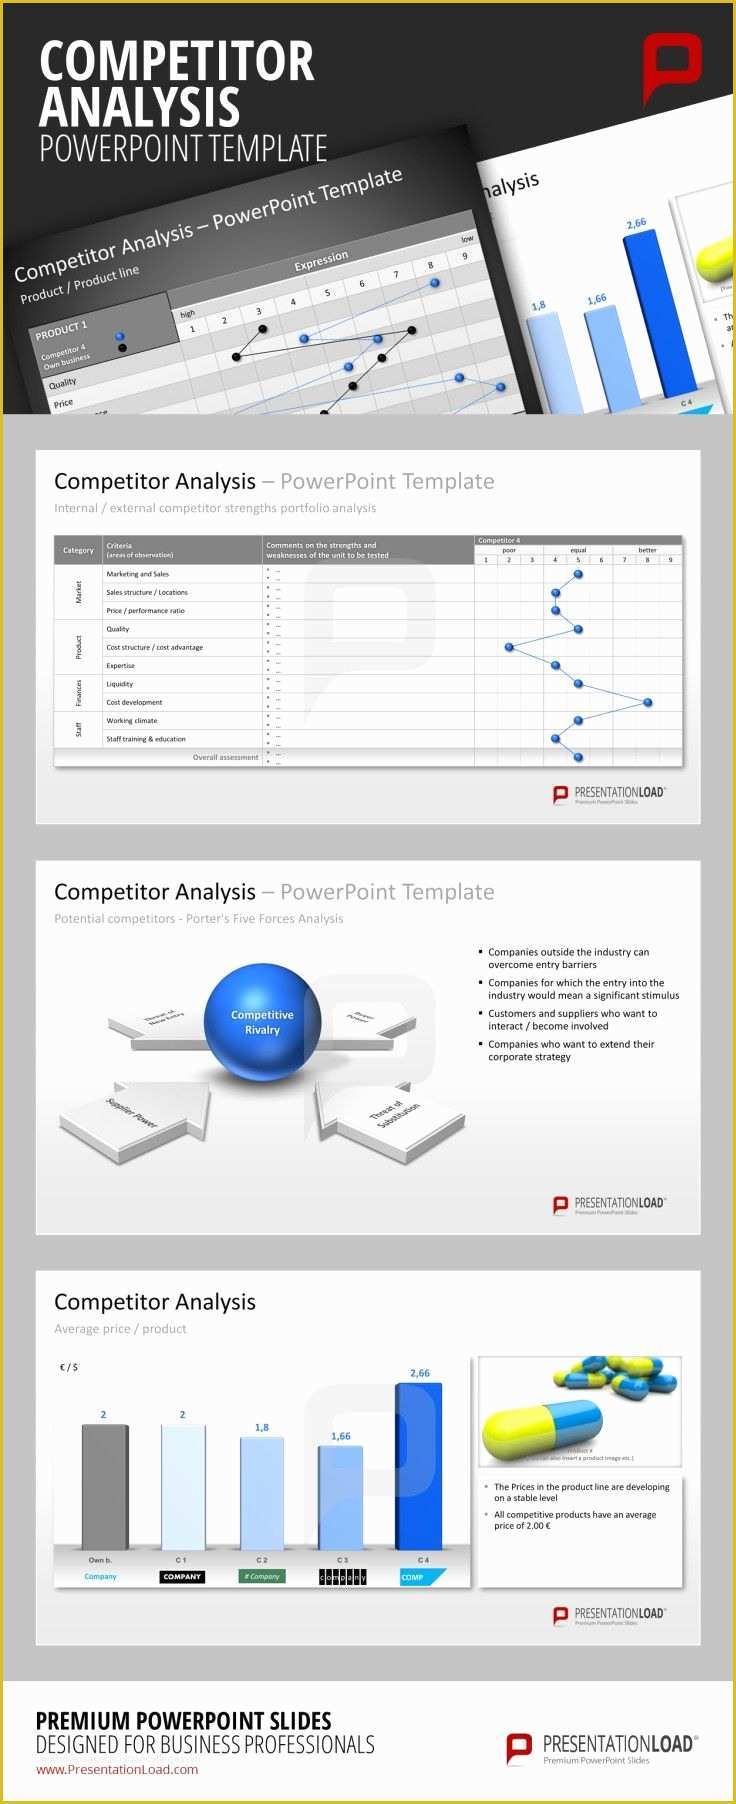 Competitor Analysis Ppt Template Free Of 86 Best Images About Business Strategy Powerpoint